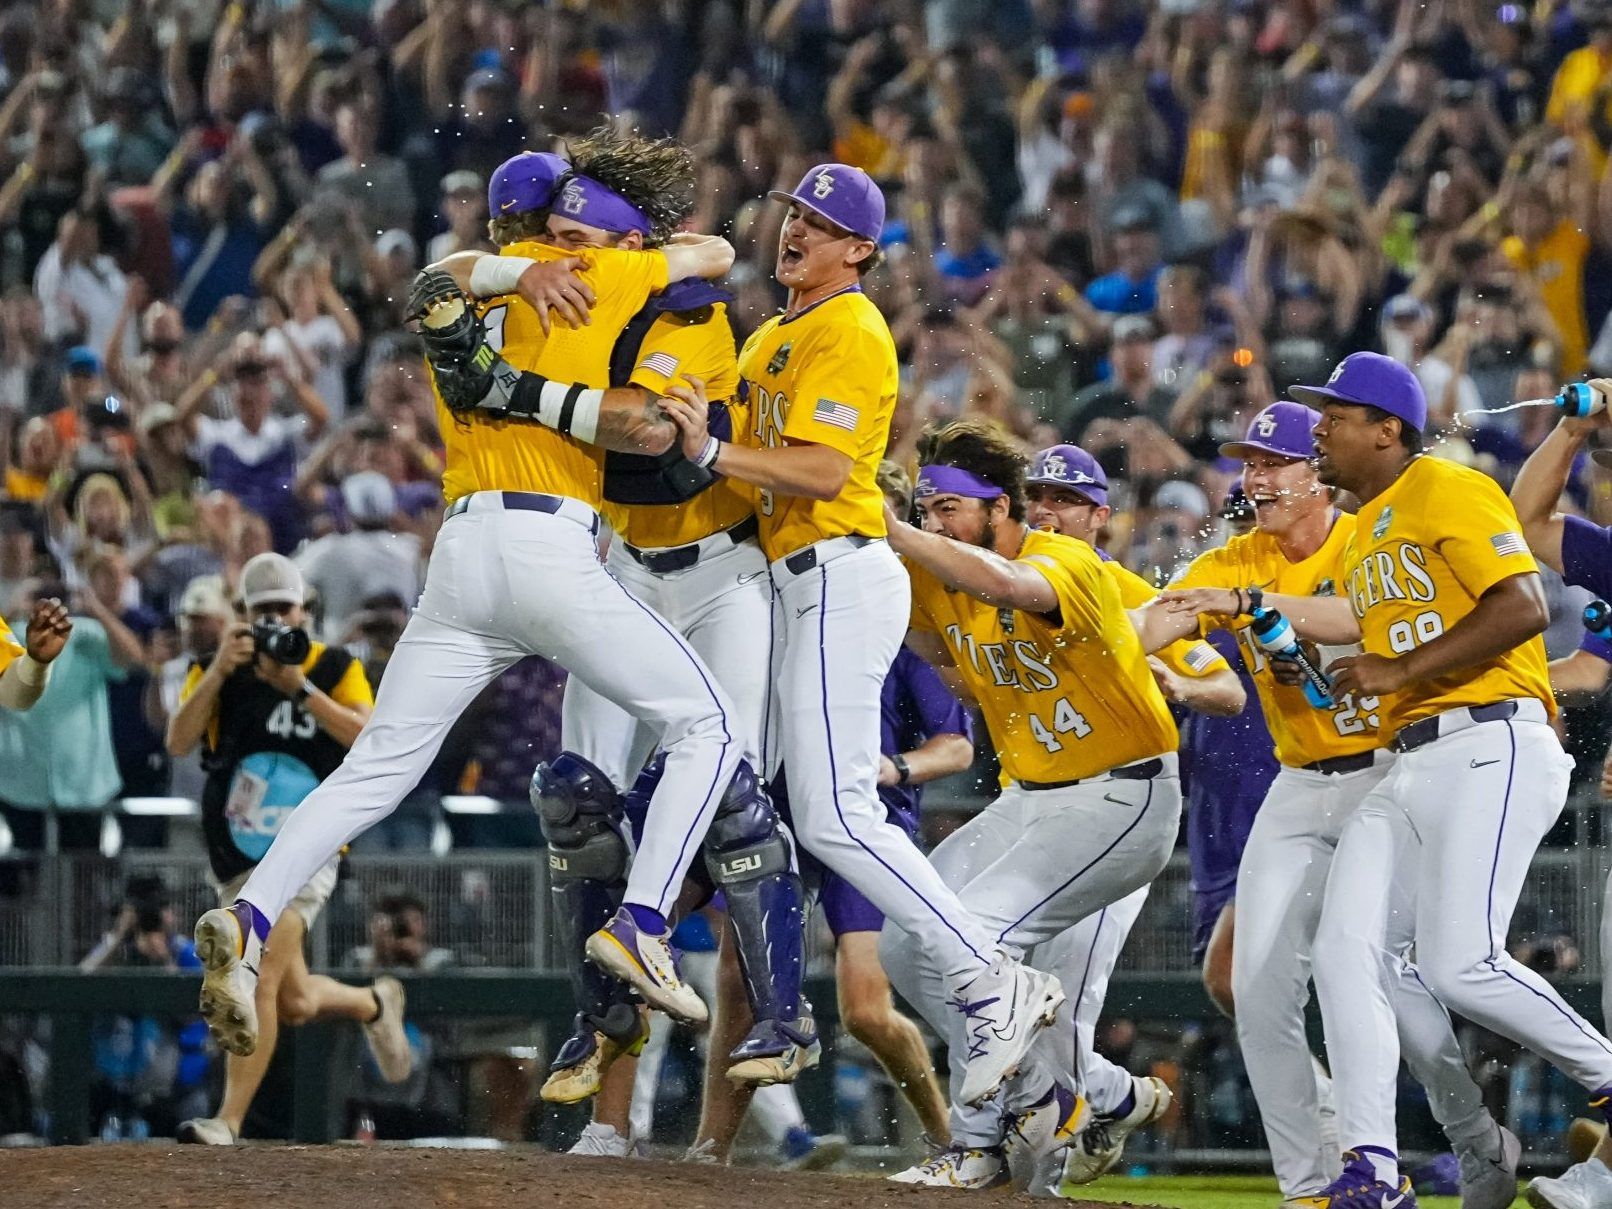 LSU wins first College World Series title since 2009, beating Florida